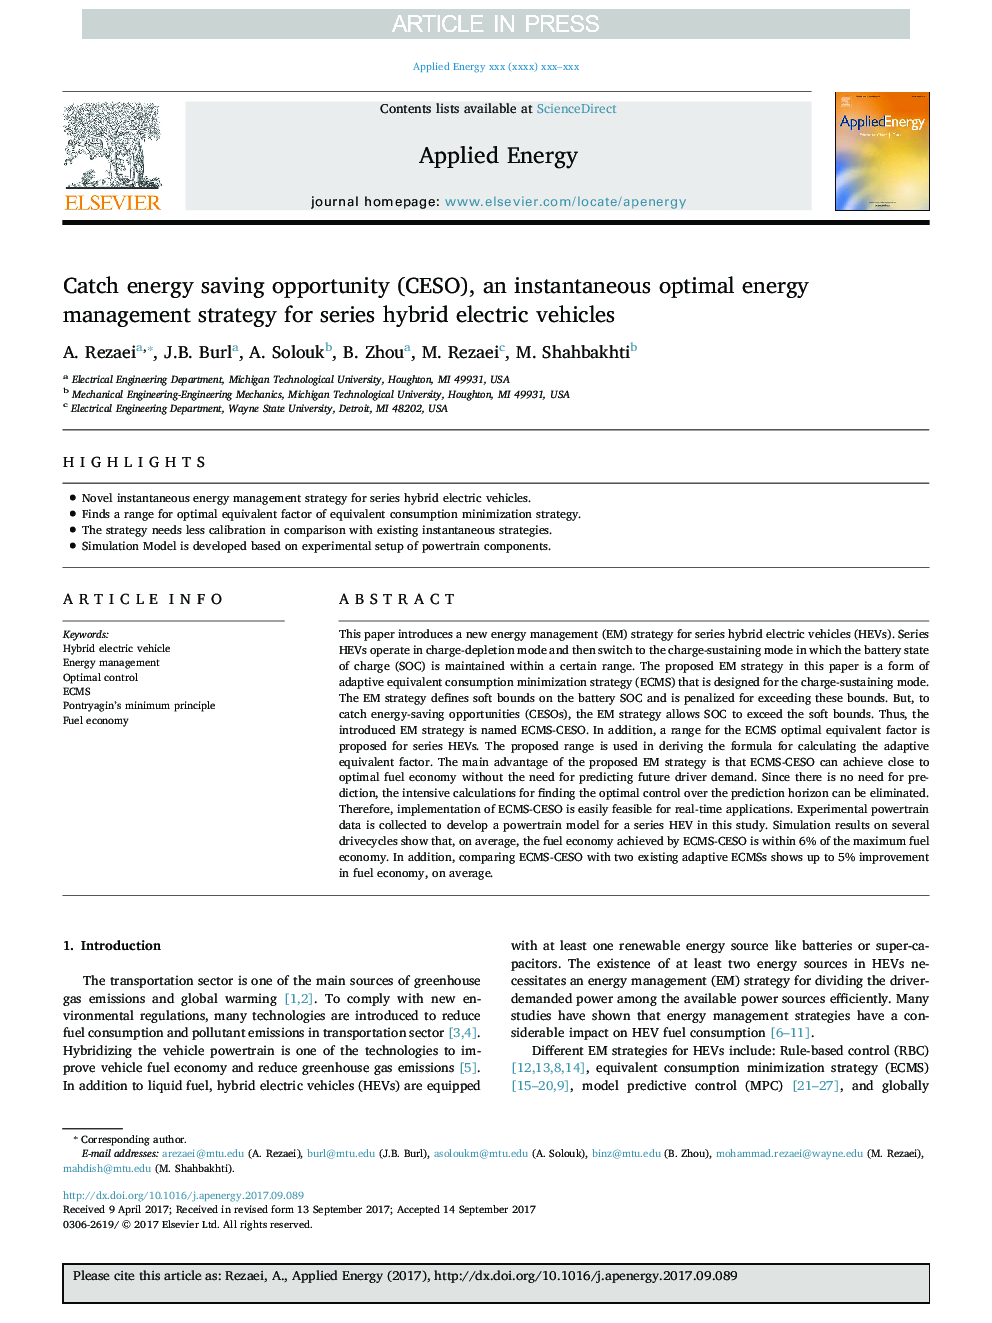 Catch energy saving opportunity (CESO), an instantaneous optimal energy management strategy for series hybrid electric vehicles